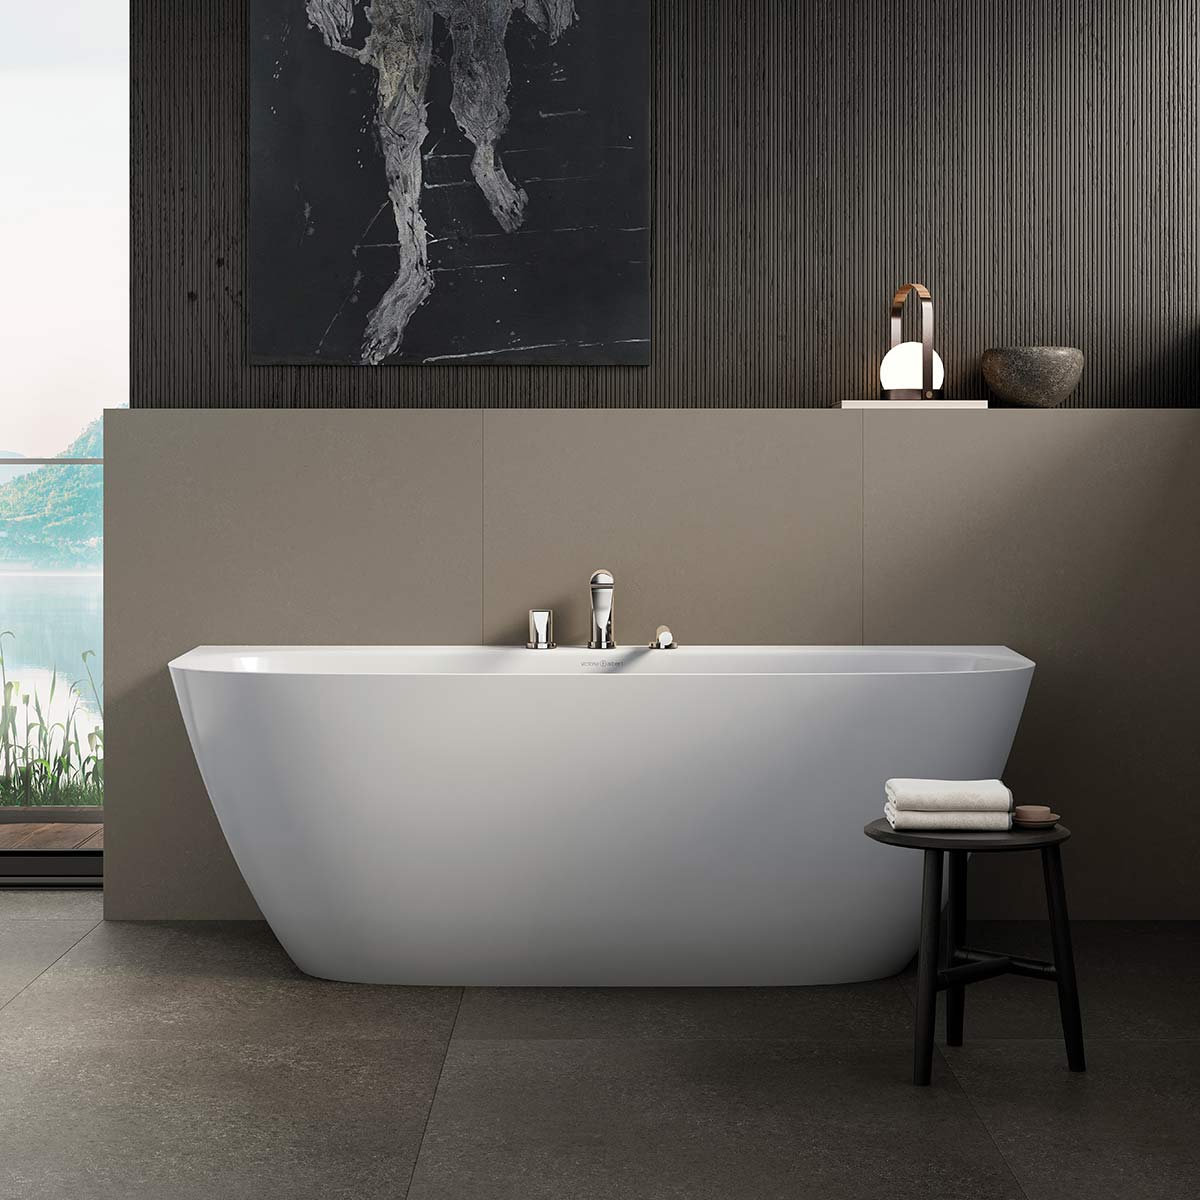 Victoria + Albert Lussari 1700 back to wall bath in gloss white. Also available in matt white or custom colour exterior. Distributed in Australia by Luxe by Design, Brisbane.